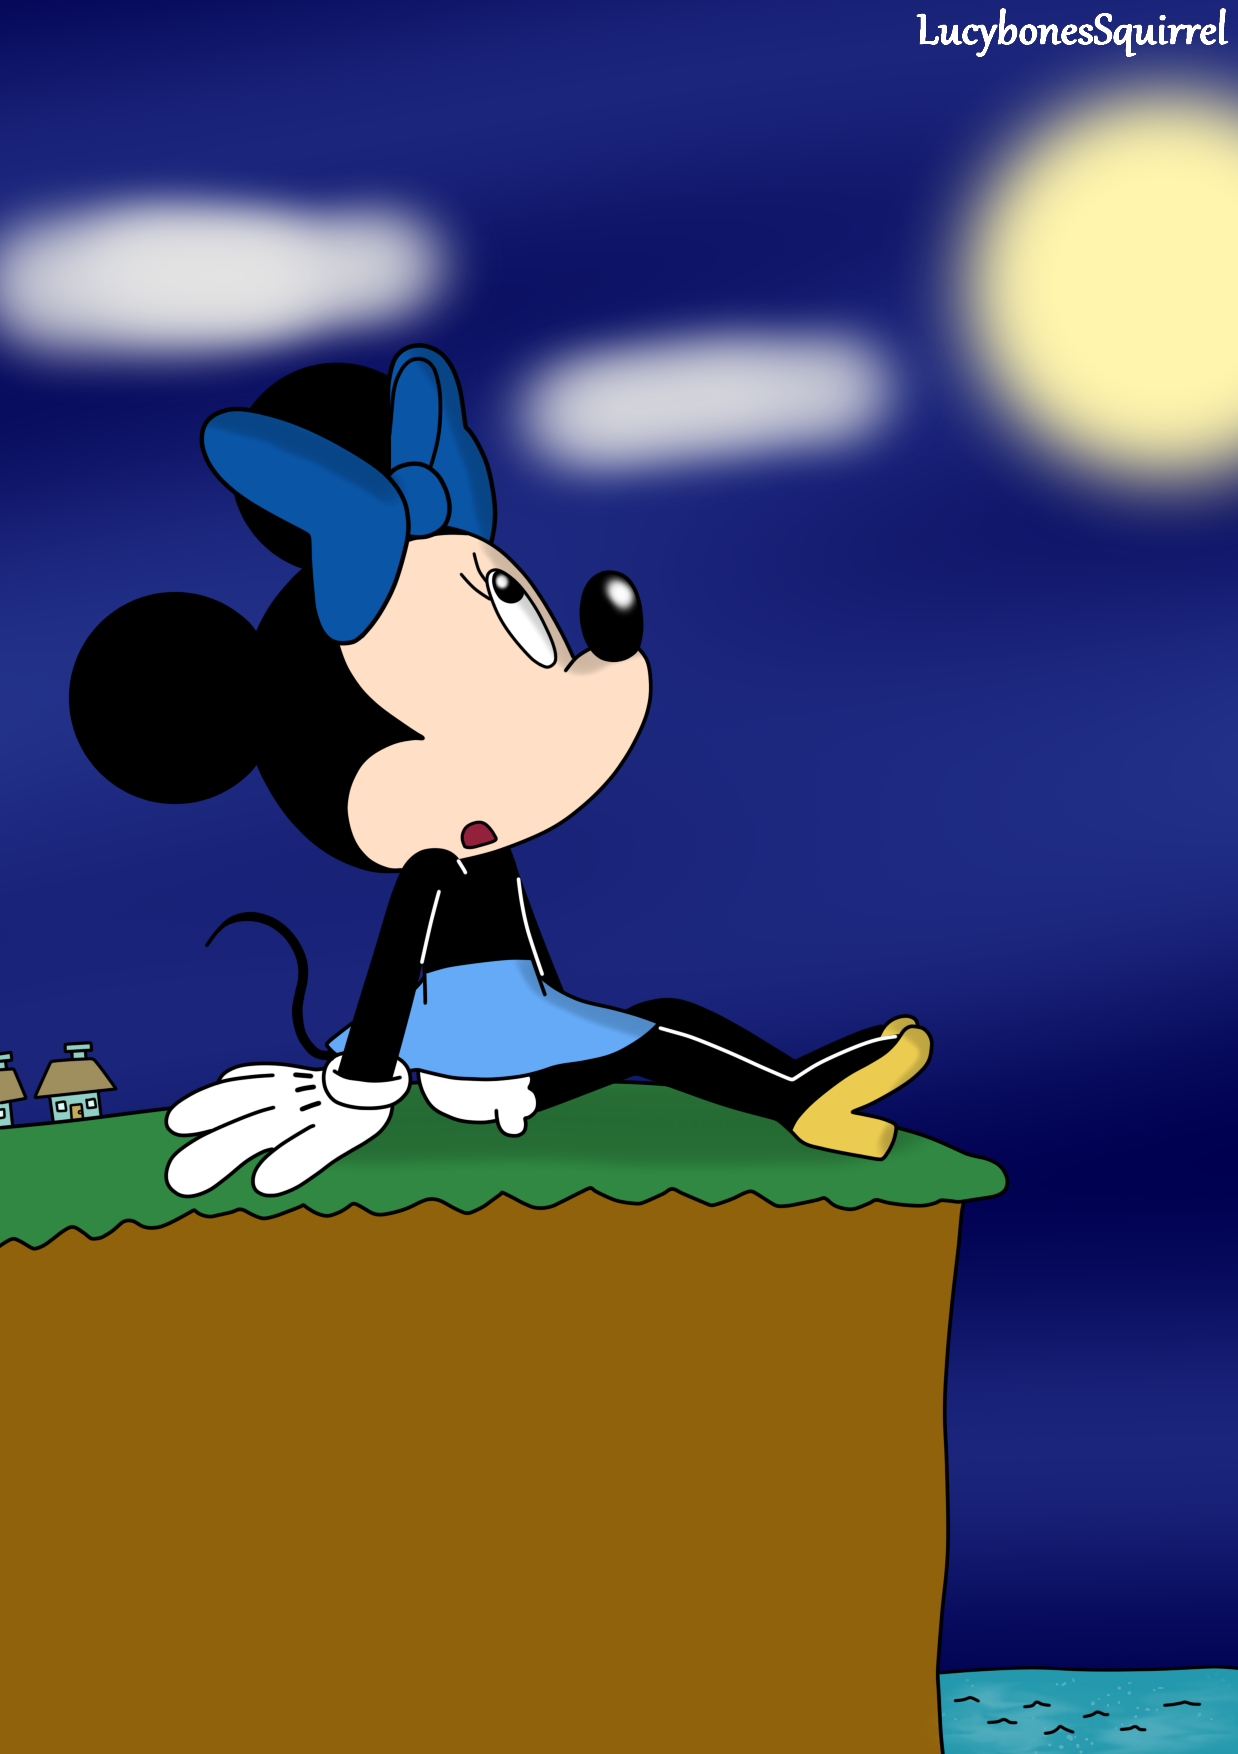 Lucybonessquirrel Giantess Minnie Sitting On The Edge Of A Cliff